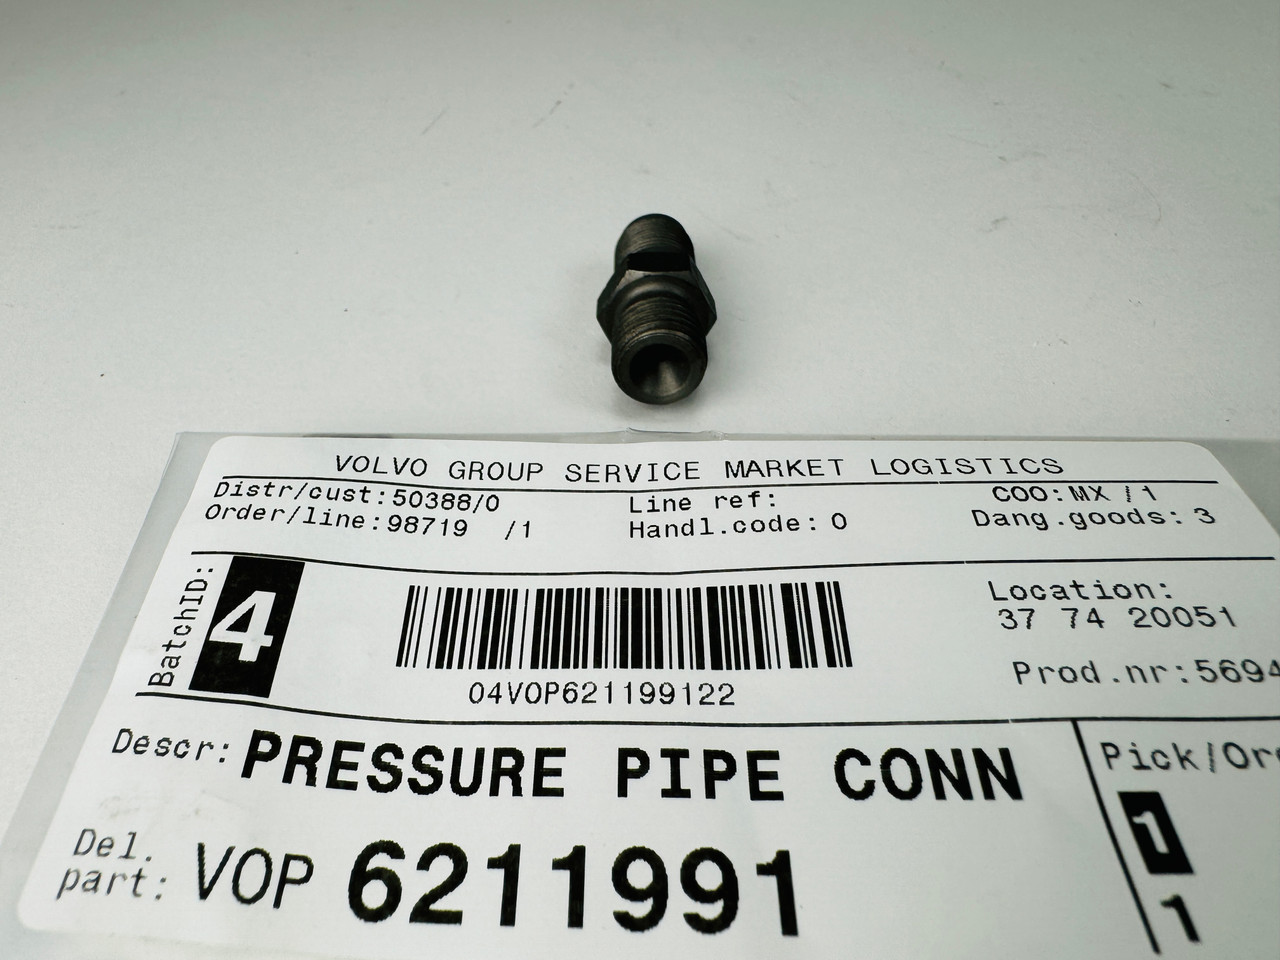 $139.88* GENUINE VOLVO no tax* PRESSURE PIPE CONNECTION 6211991 *Special Order 10 To 14 Days For Delivery